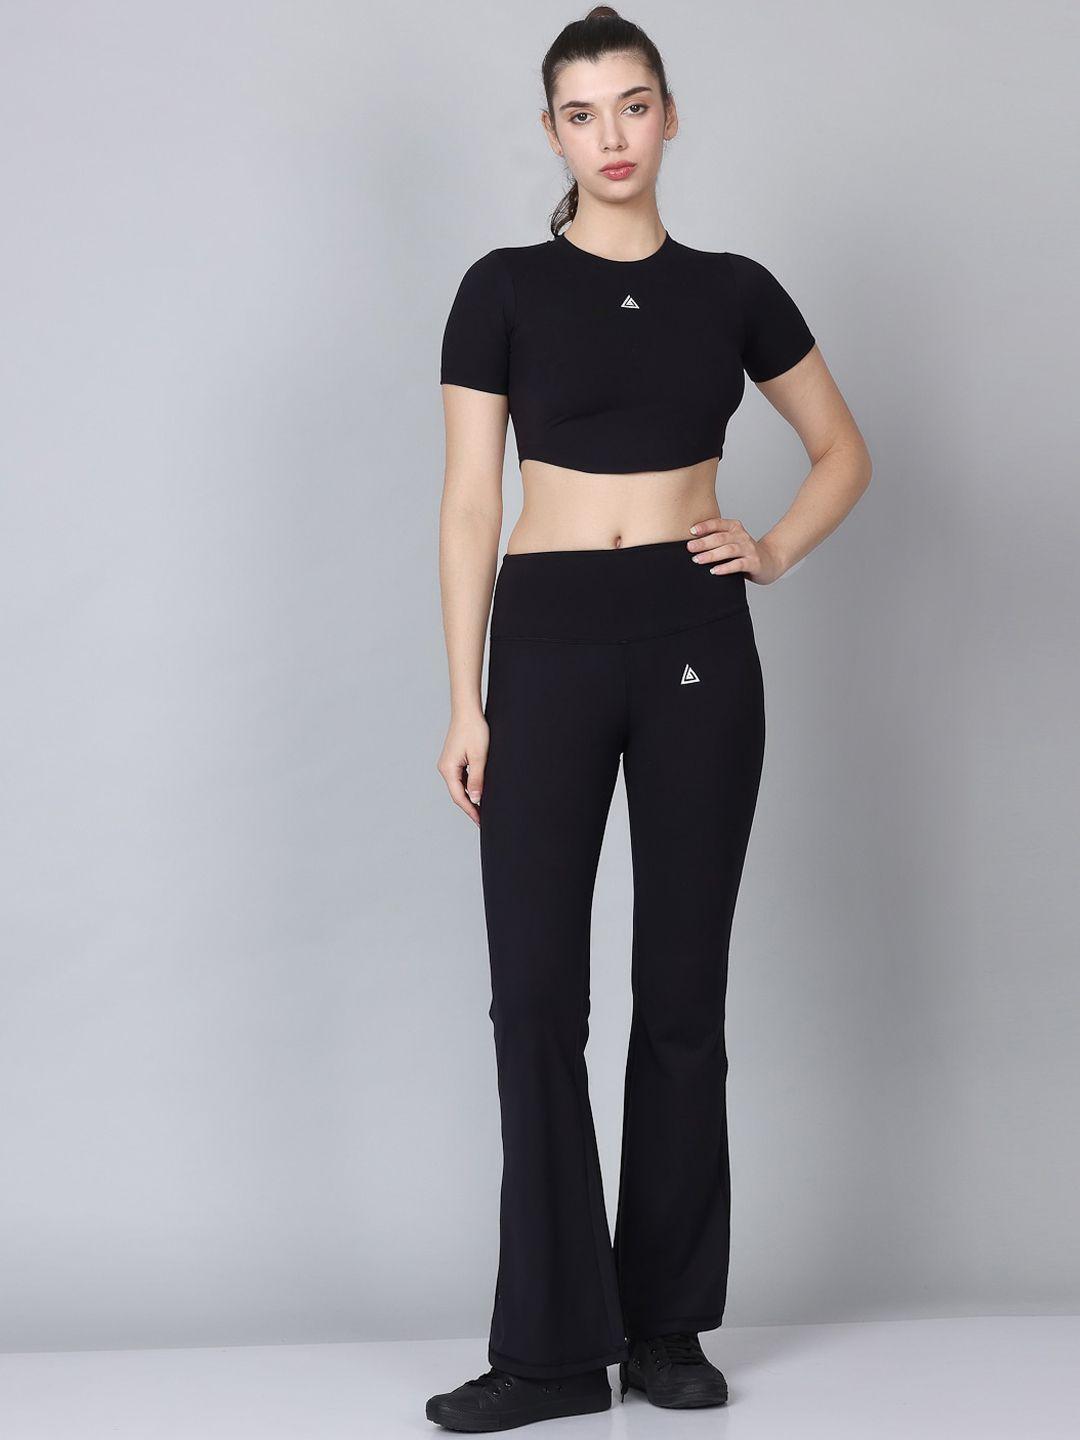 aesthetic bodies printed sports bra & trousers co-ords